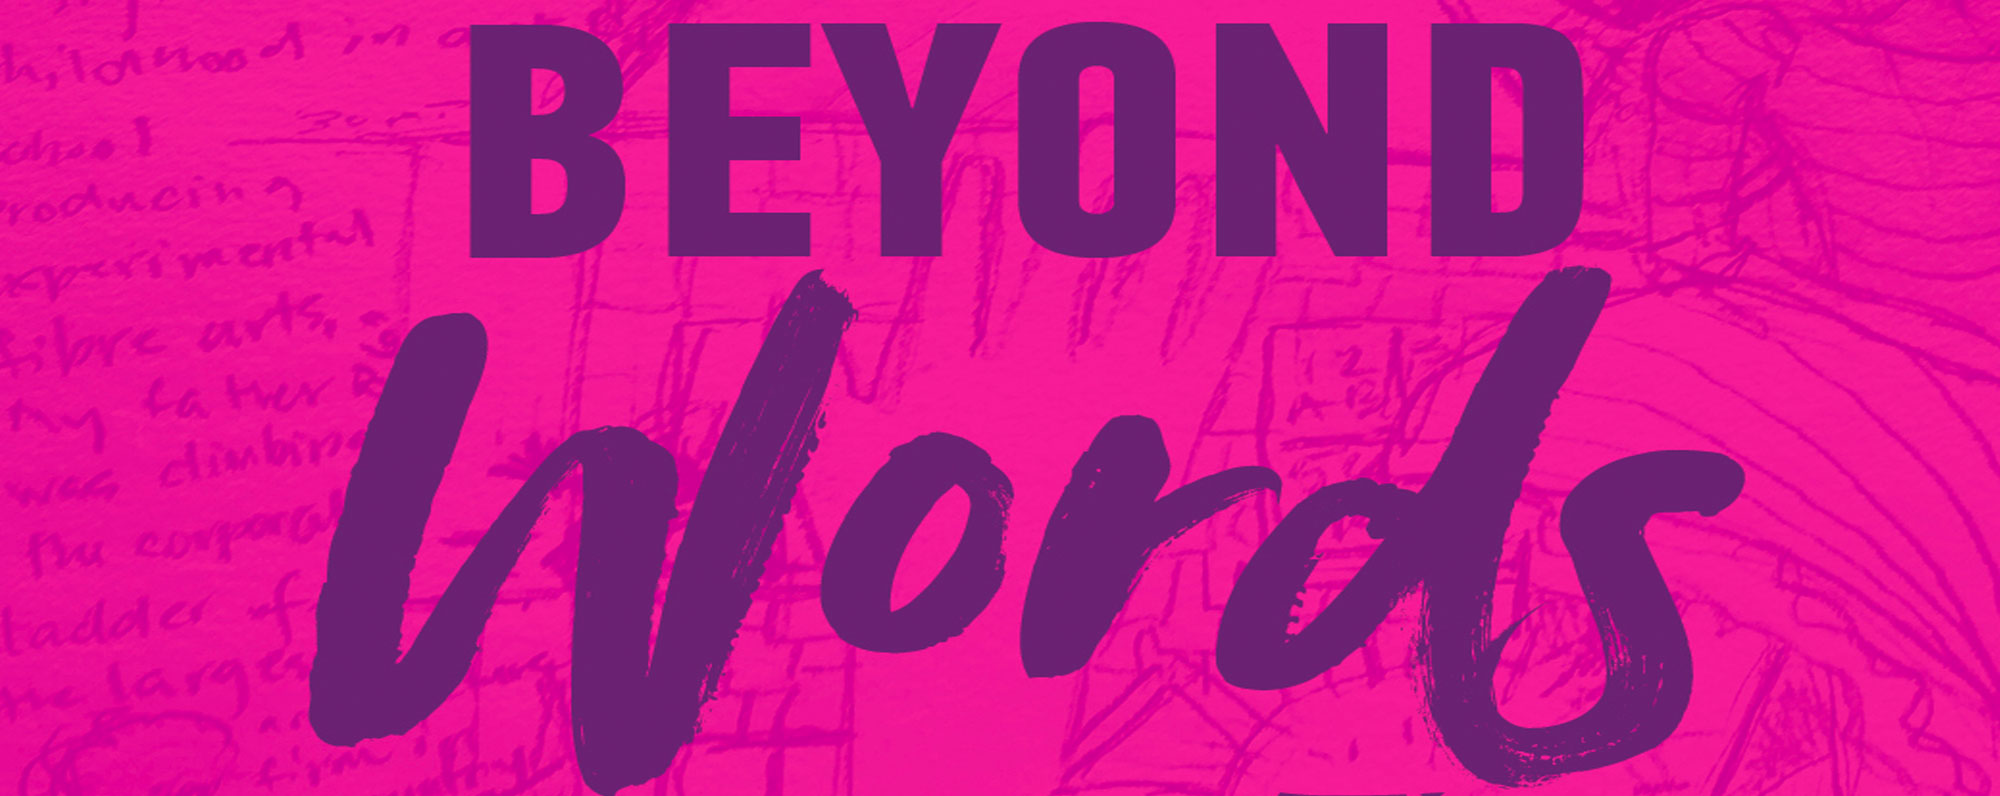 BEYOND WORDS: A COURSE FOR OLDER ADULTS